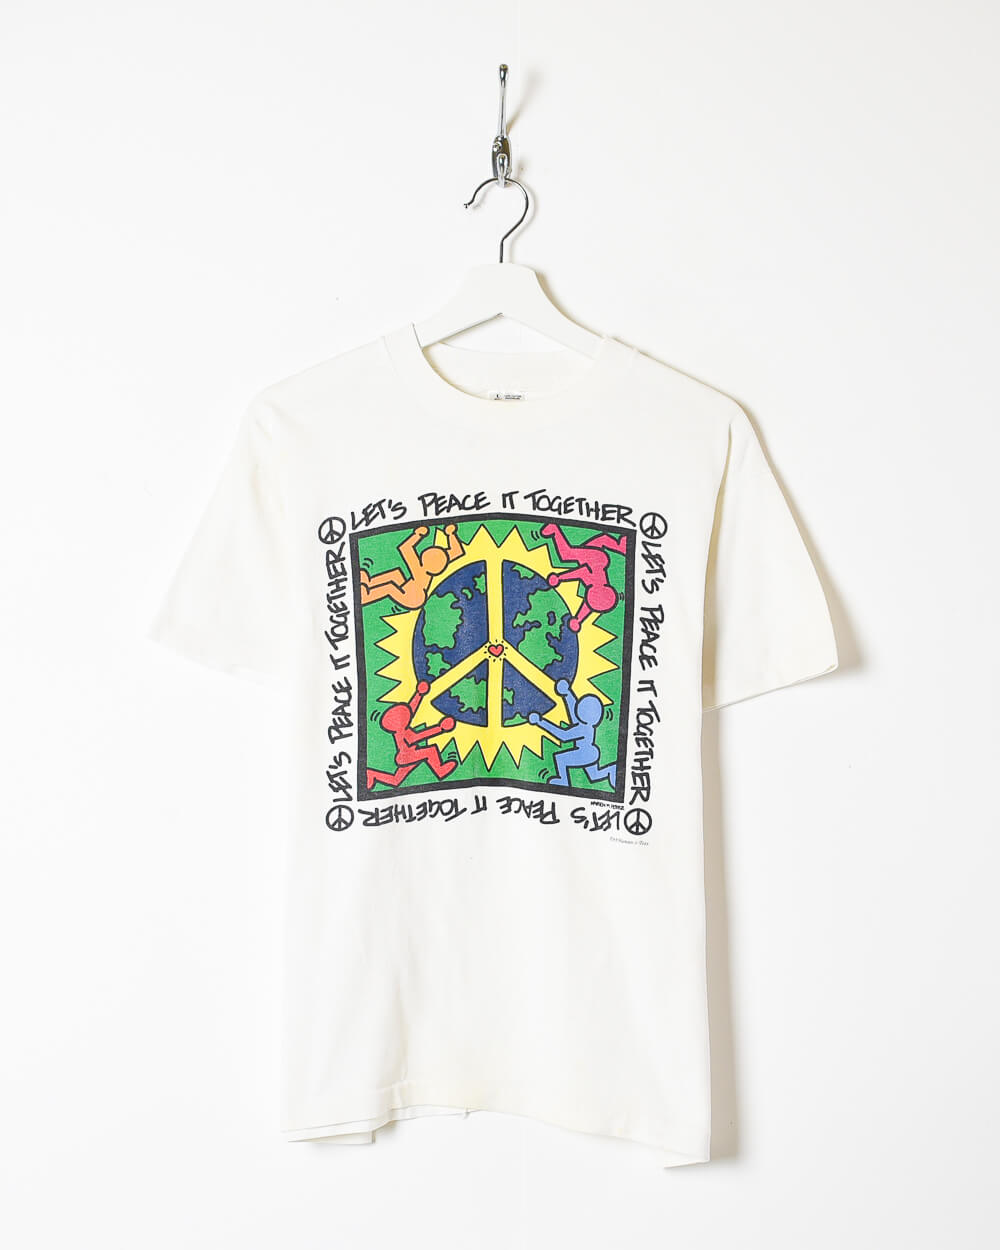 White Keith Haring Let's Peace it Together T-Shirt - Medium